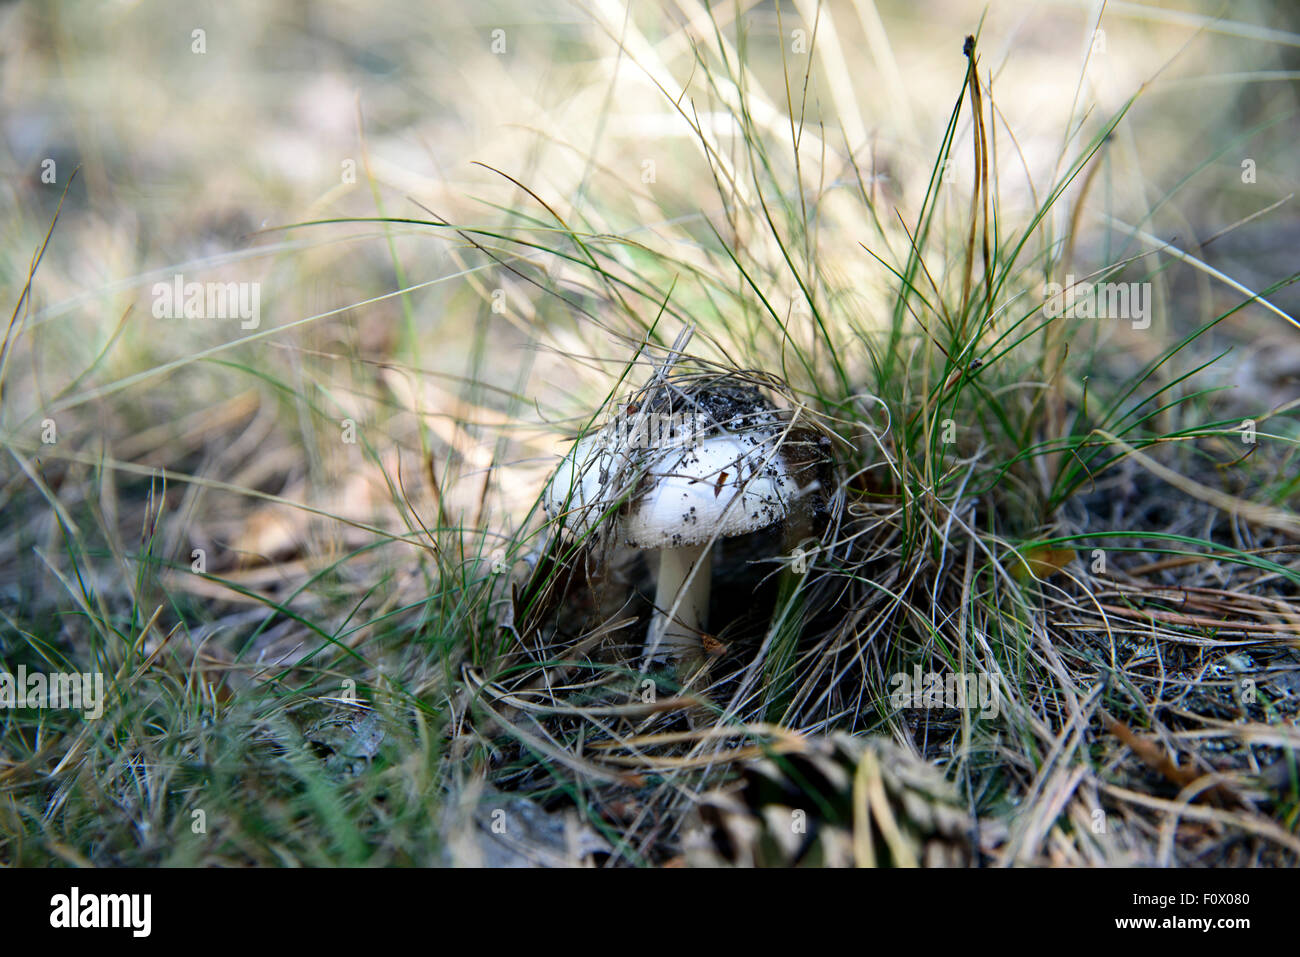 a picture of a poisonous mushroom in the wild Stock Photo